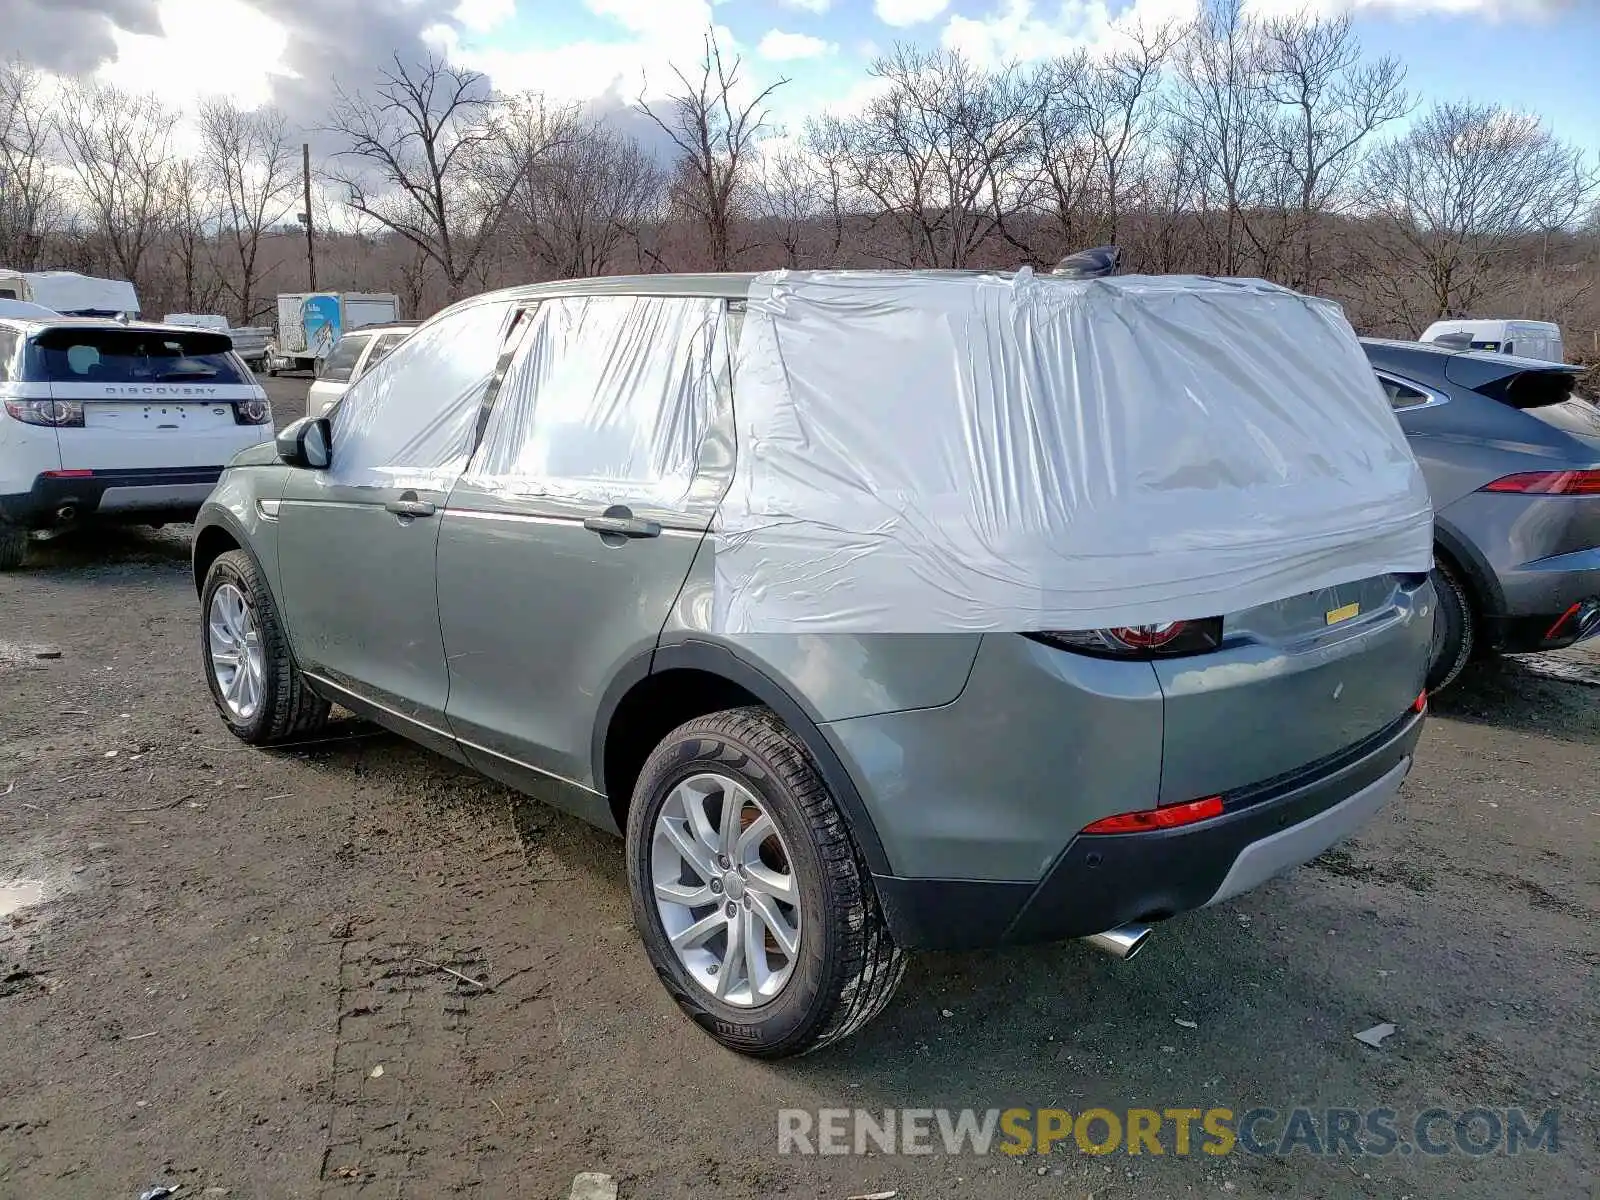 9 Photograph of a damaged car SALCR2FXXKH813894 LAND ROVER DISCOVERY 2019